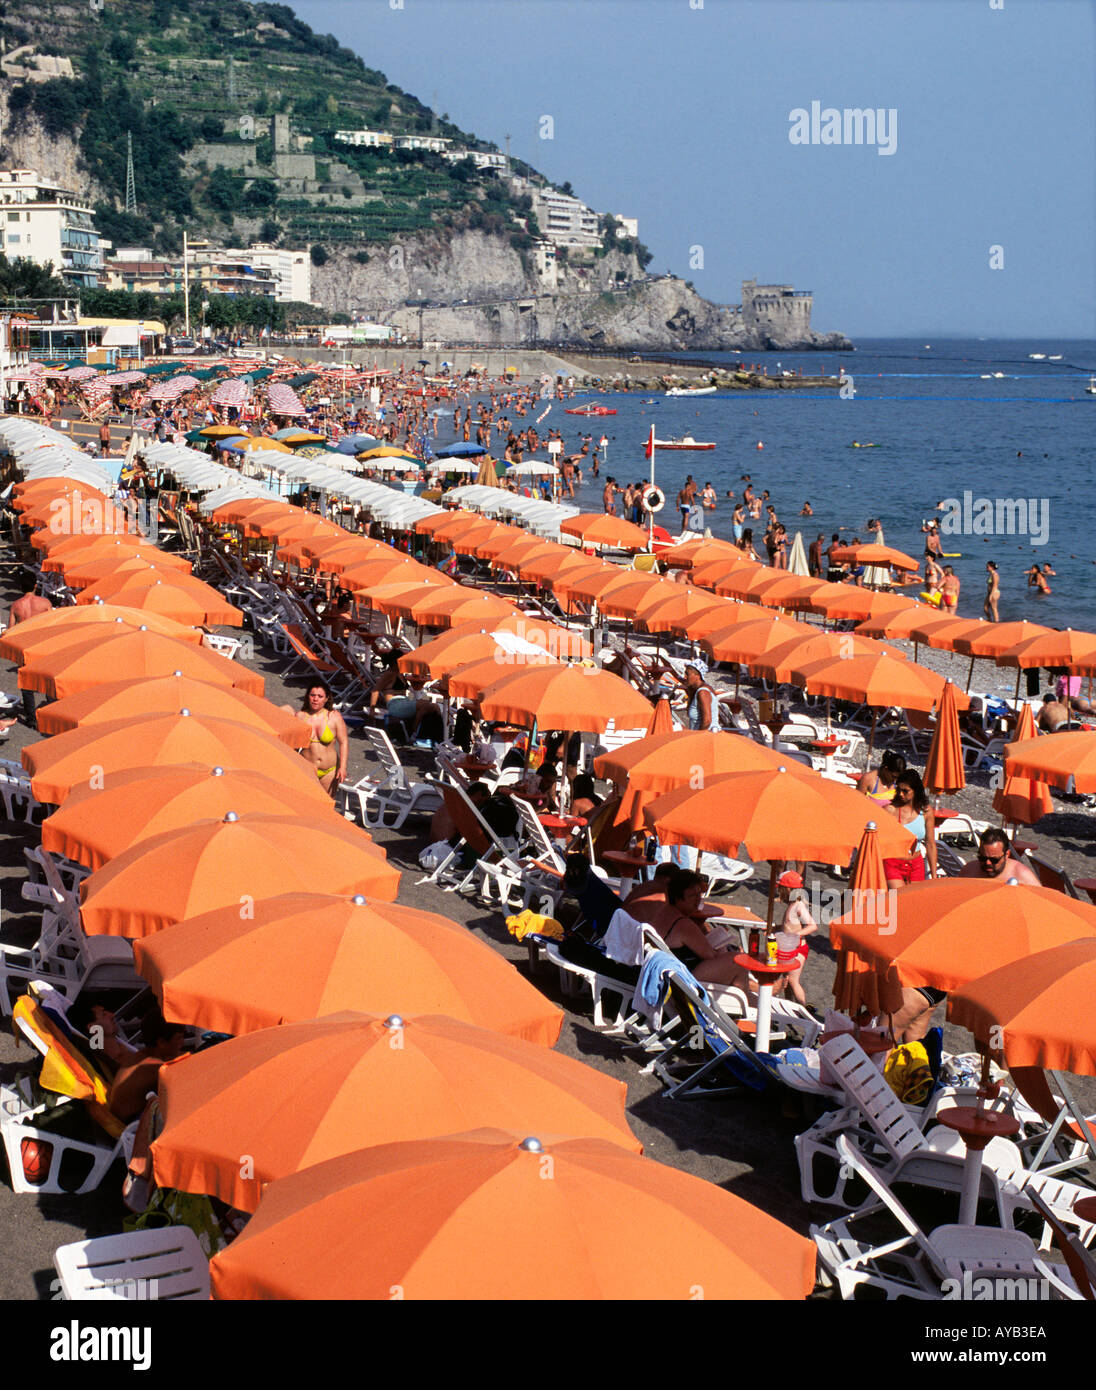 Typical lines of Umbrellas on Adriatic beaches in Italy Stock Photo